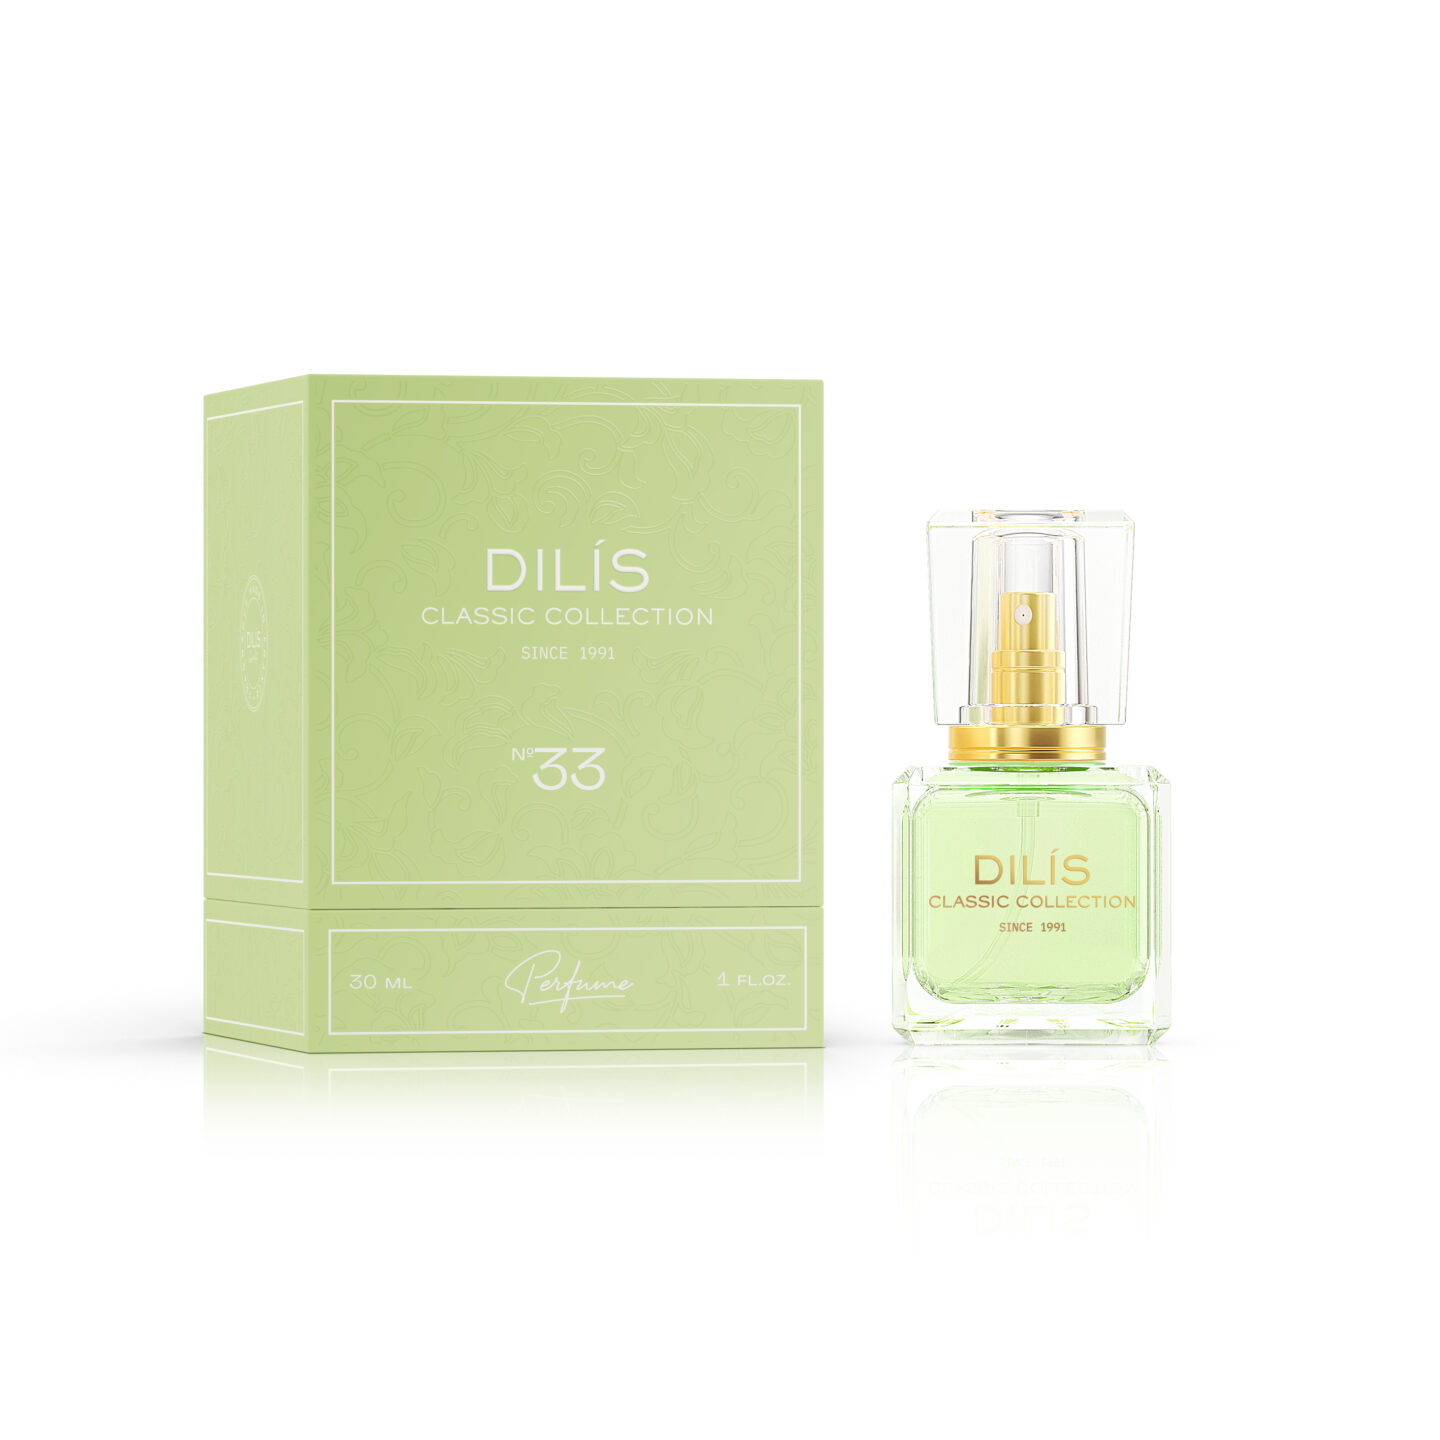 Духи Dilis Parfum Classic Collection №33 30 мл classic fun collection 5 in 1